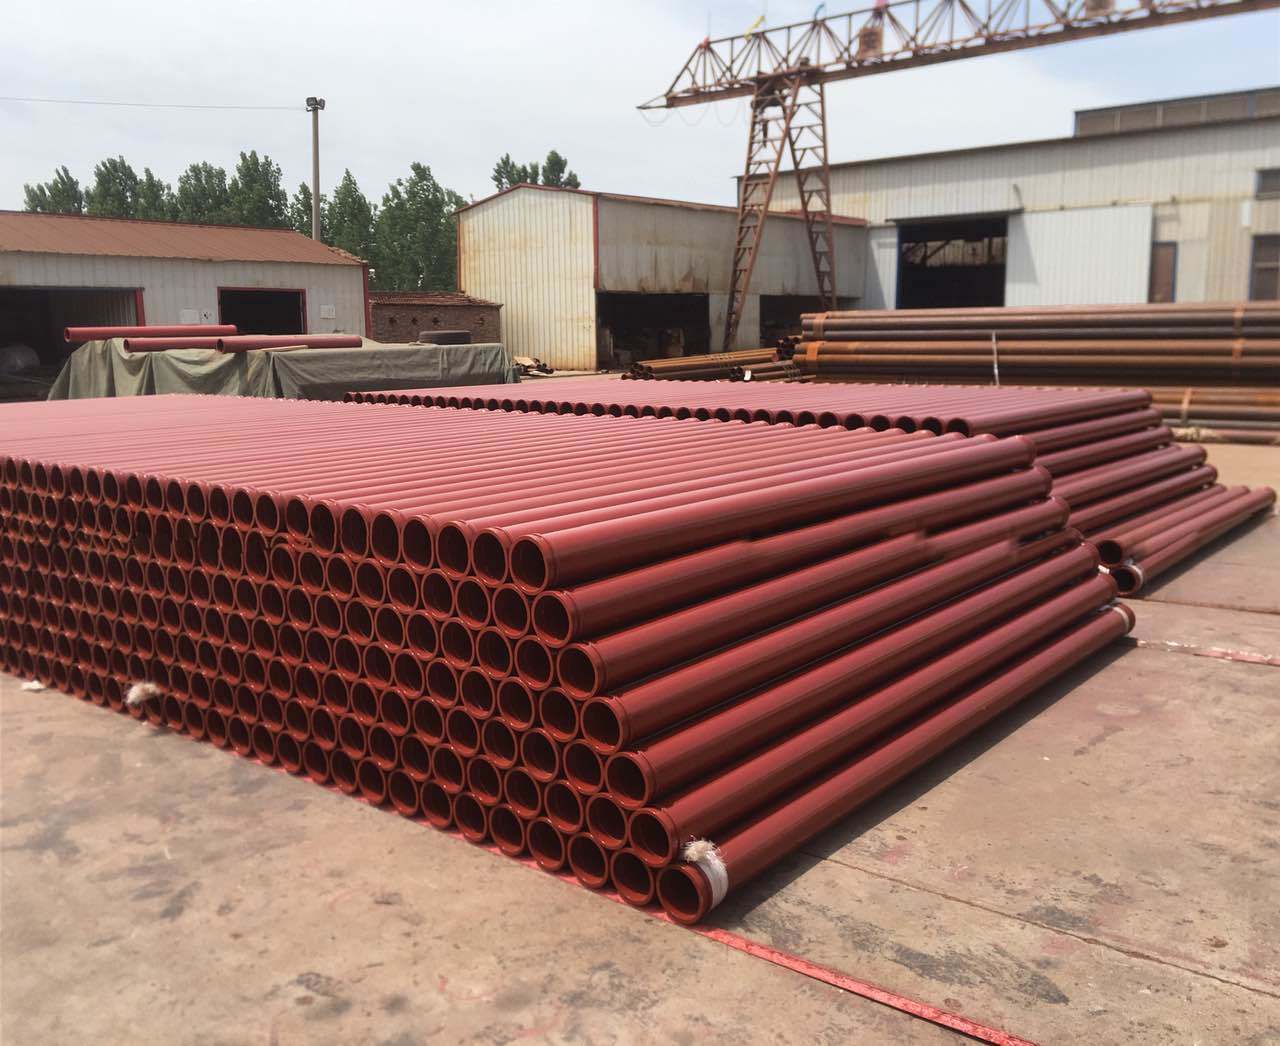 Concrete Pump Linepipe (5" 4.0-7.1 mm) for Pm Trucks and Mixer